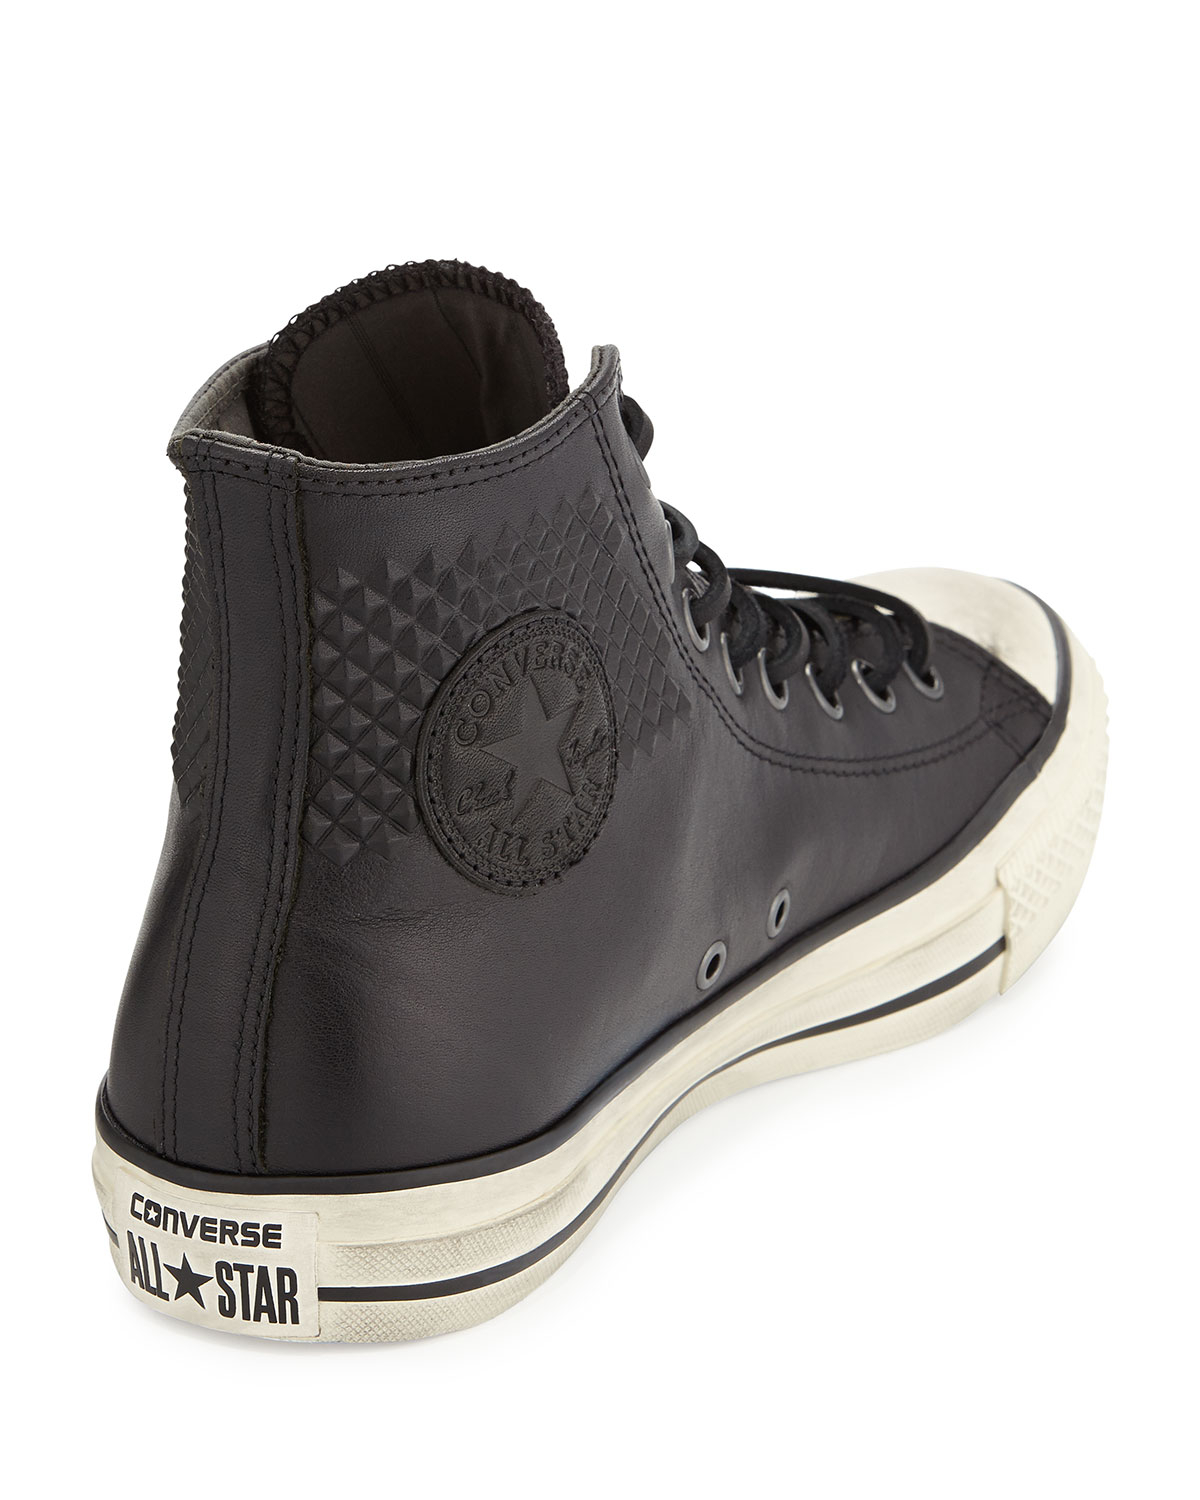 Converse John Varvatos Studded Leather High Top Sneaker In Black Lyst